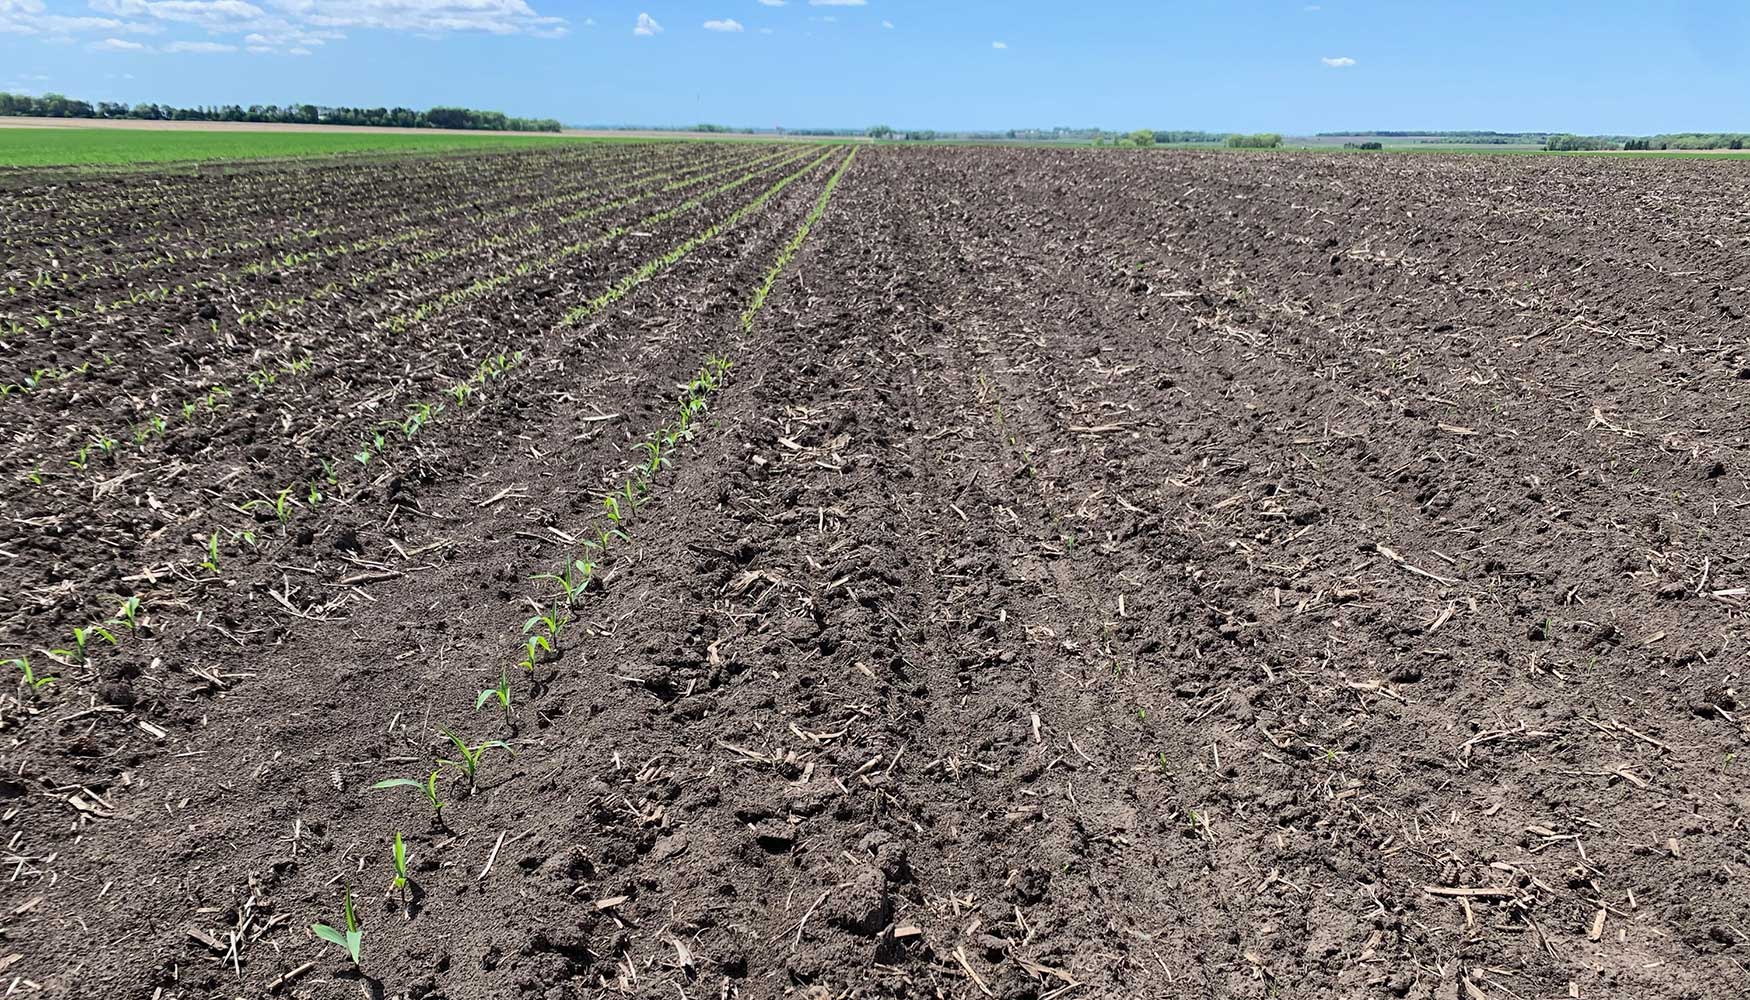 A field divided into two planting areas. The left area has young corn plants emerging from the soil. The right has no visible corn emergence yet.